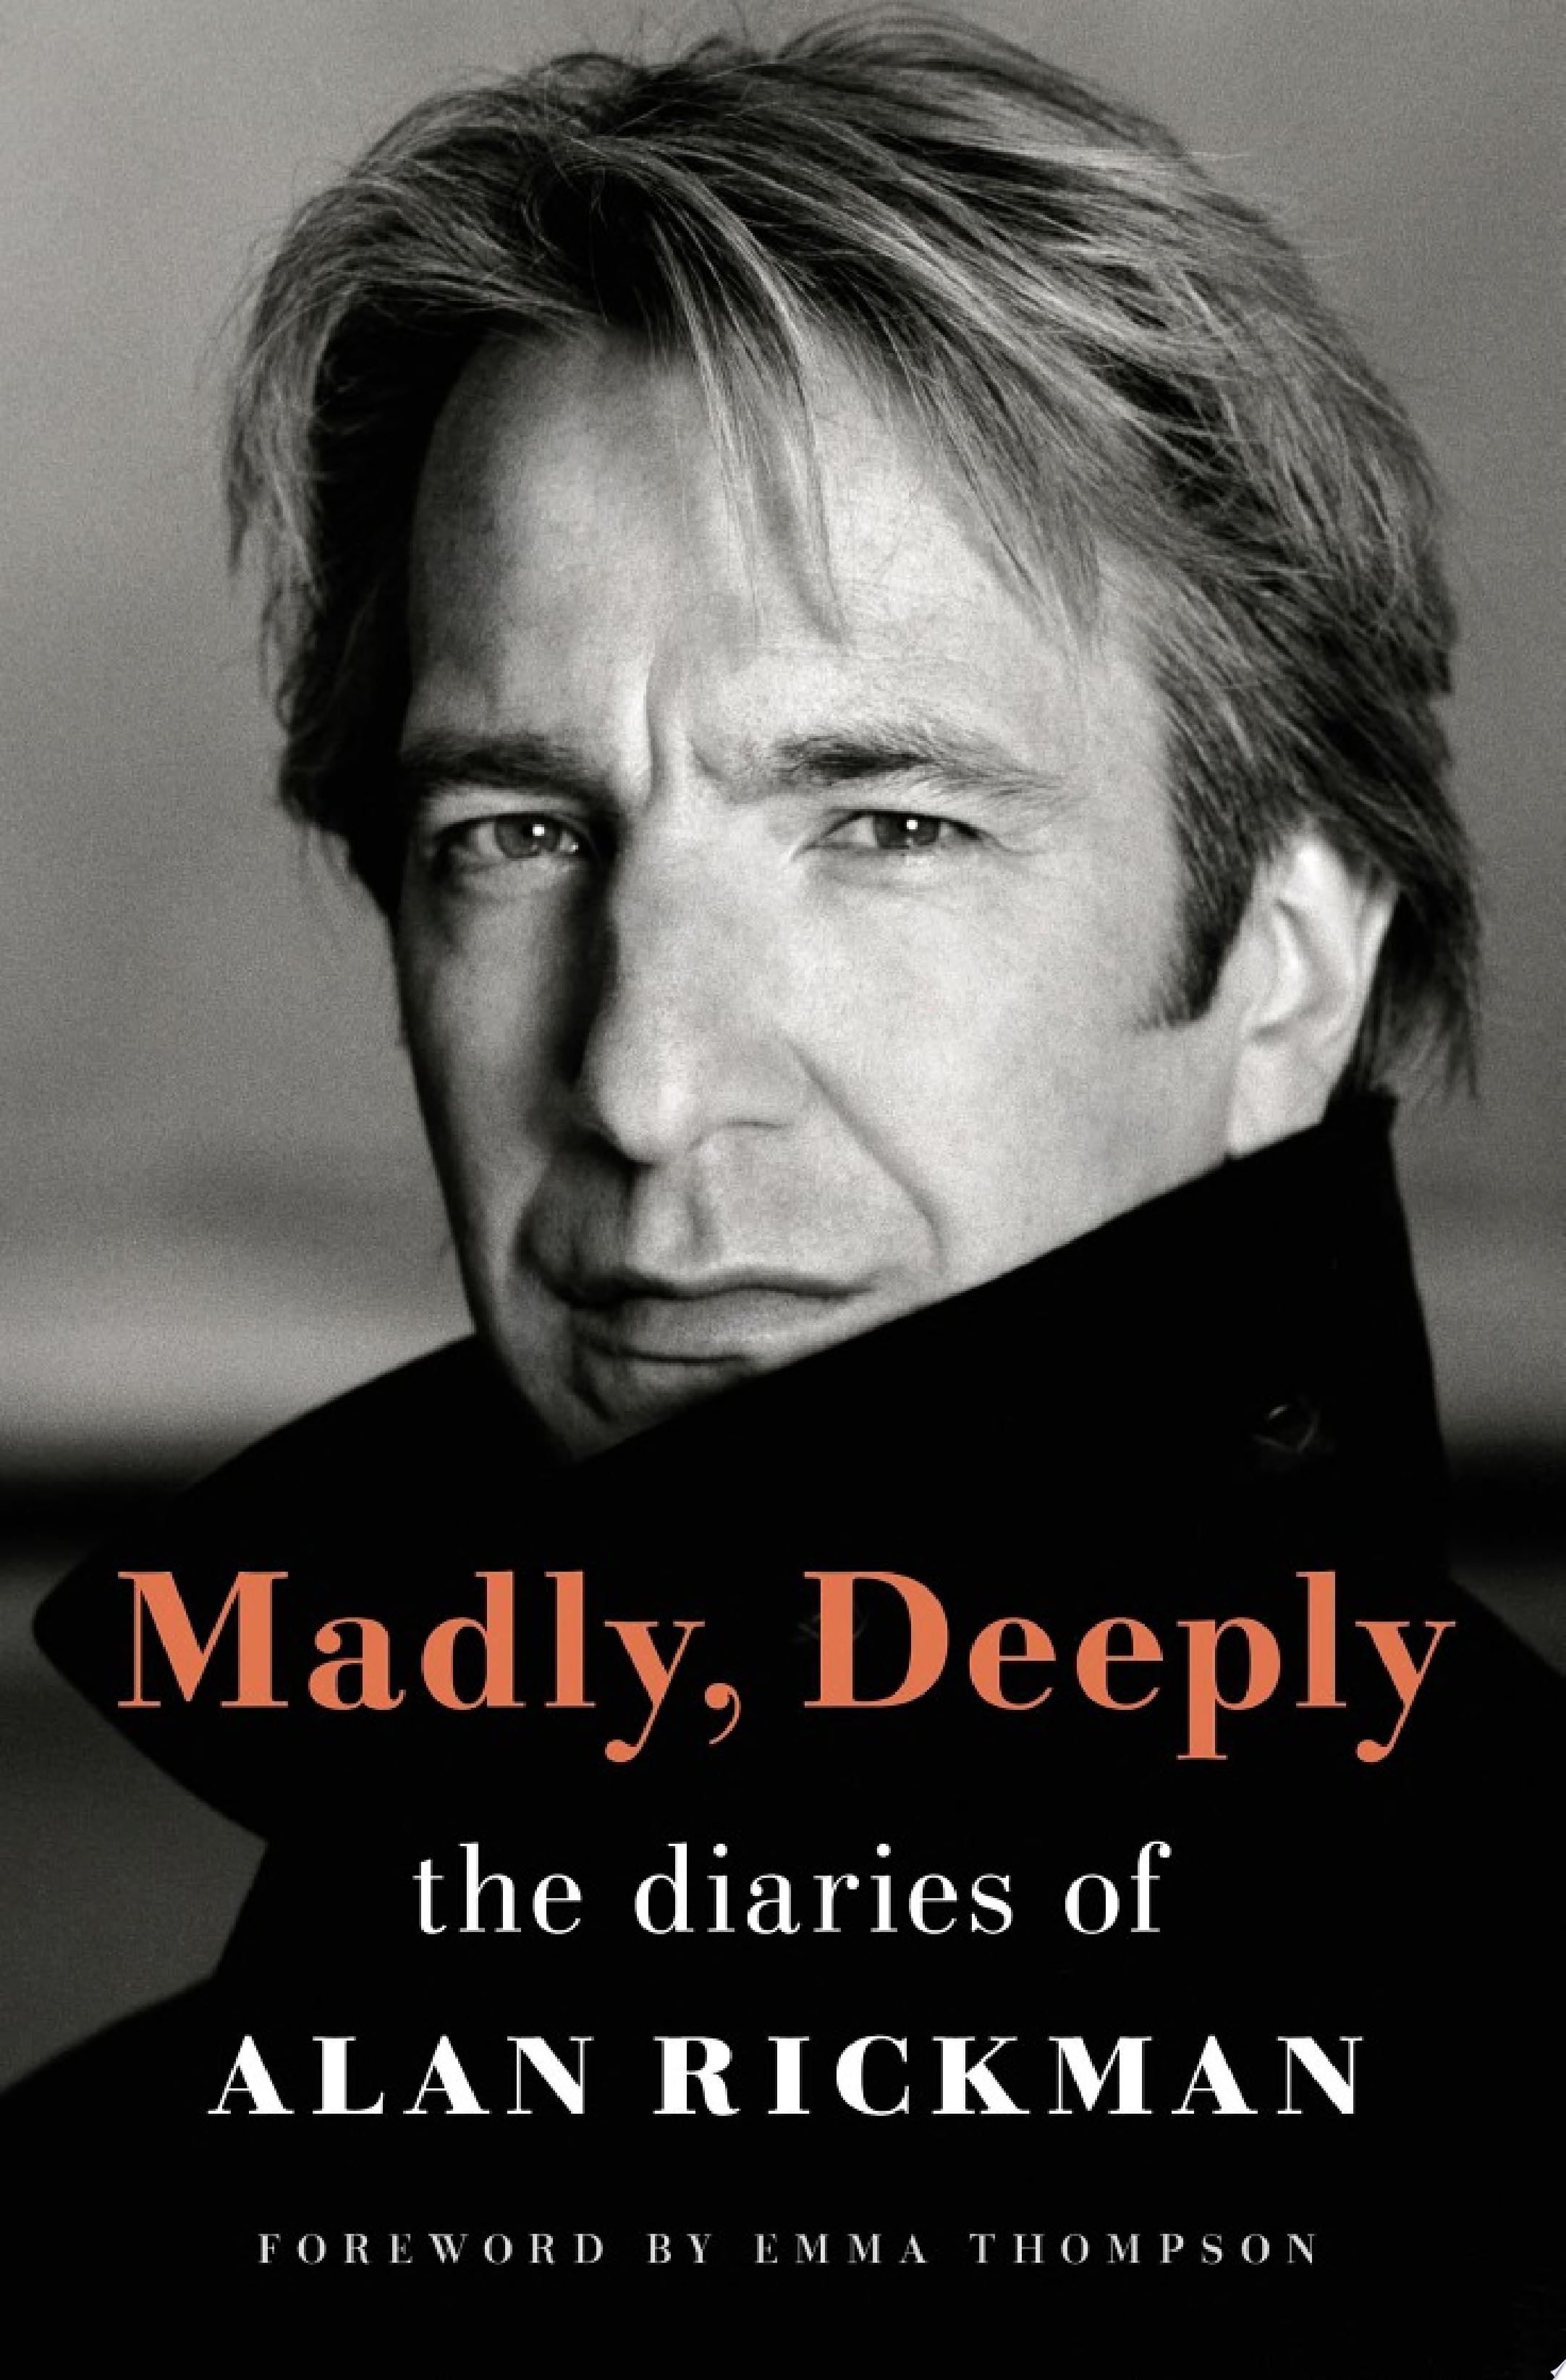 Image for "Madly, Deeply"